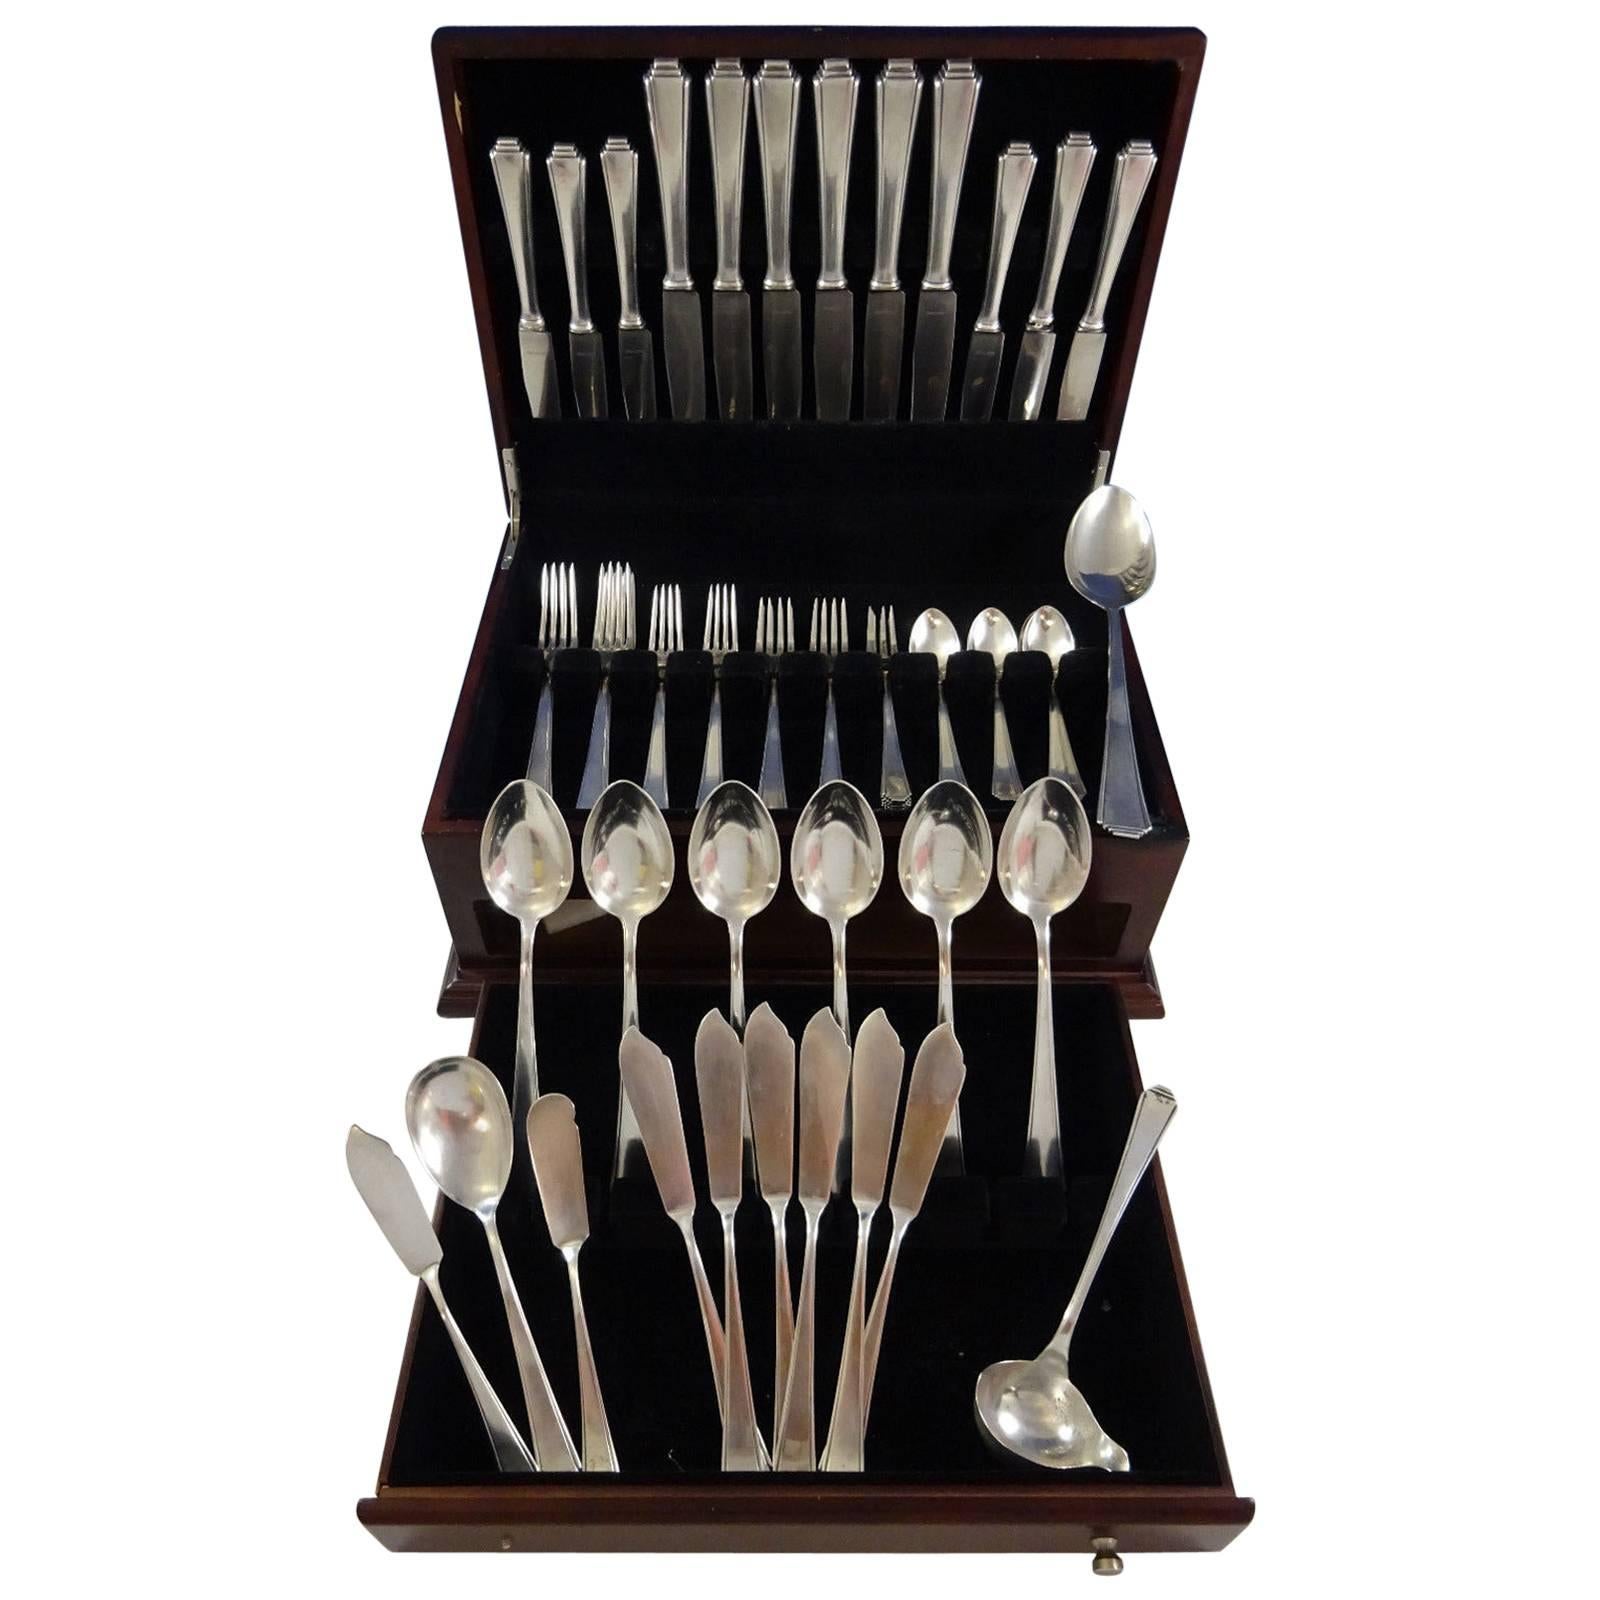 Fabulous Art Deco pyramid by Lutz & Weiss, made in Pforzheim, Germany, German 800 silver flatware set of 58 pieces. This set includes:

Six dinner size knives, 10 1/4